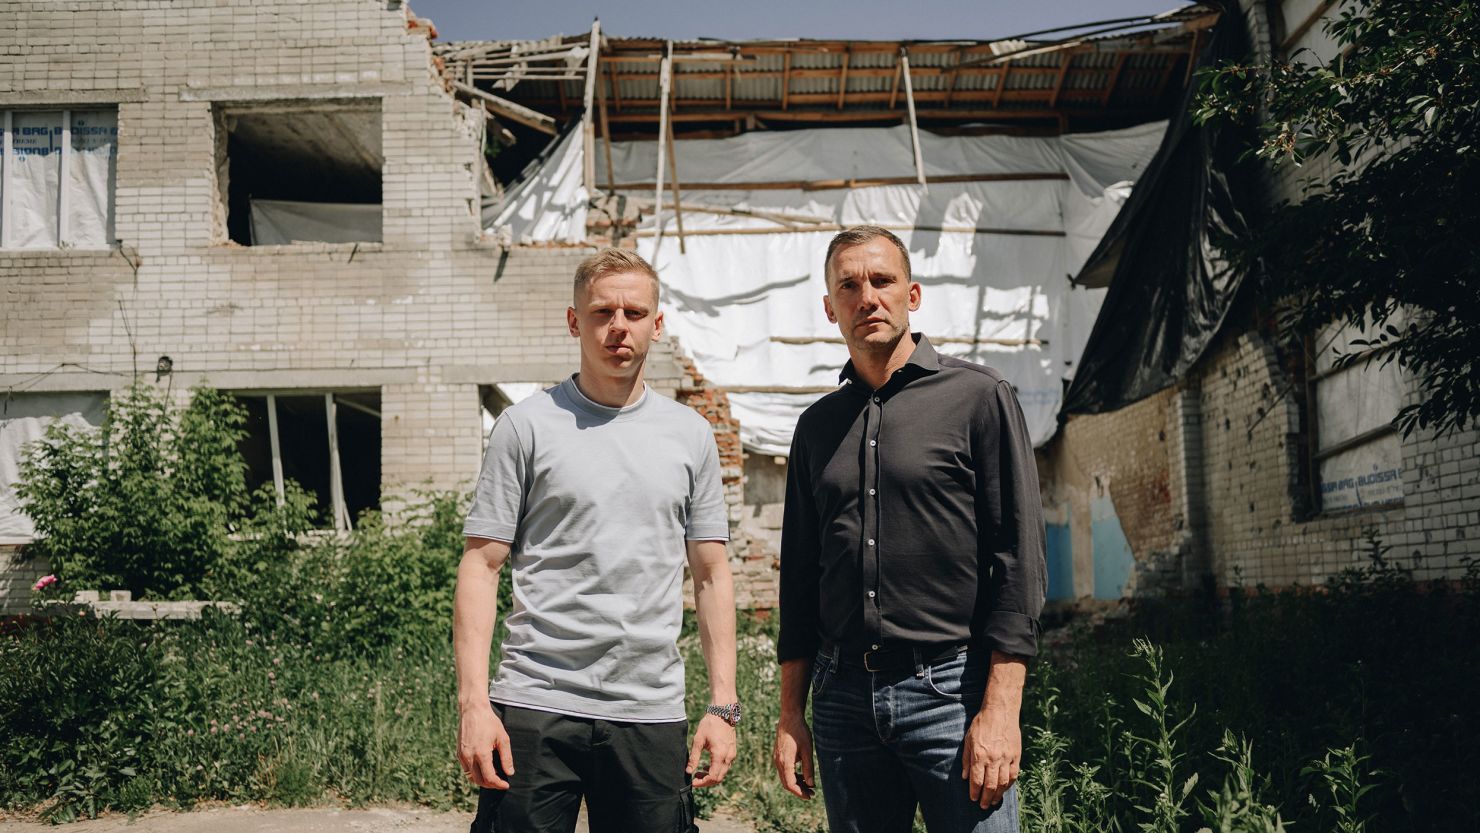 Oleksandr Zinchenko and Andriy Shevchenko visit a school in northern Ukraine that was damaged by a Russian missile.